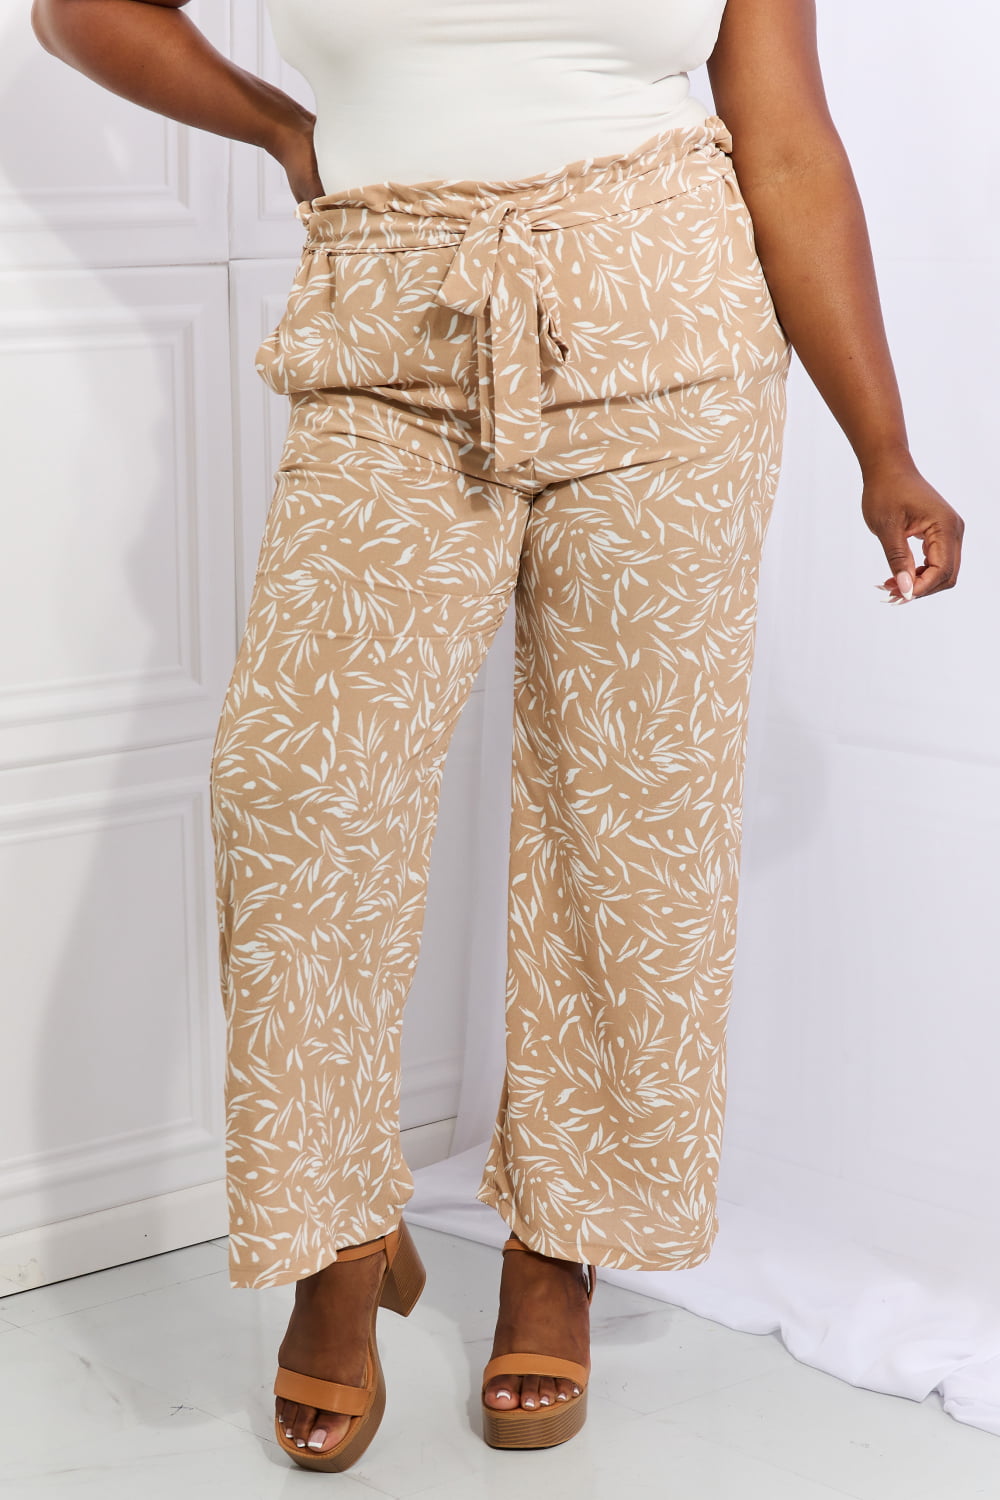 Right Angle Tan Geometric Pants - Cheeky Chic Boutique